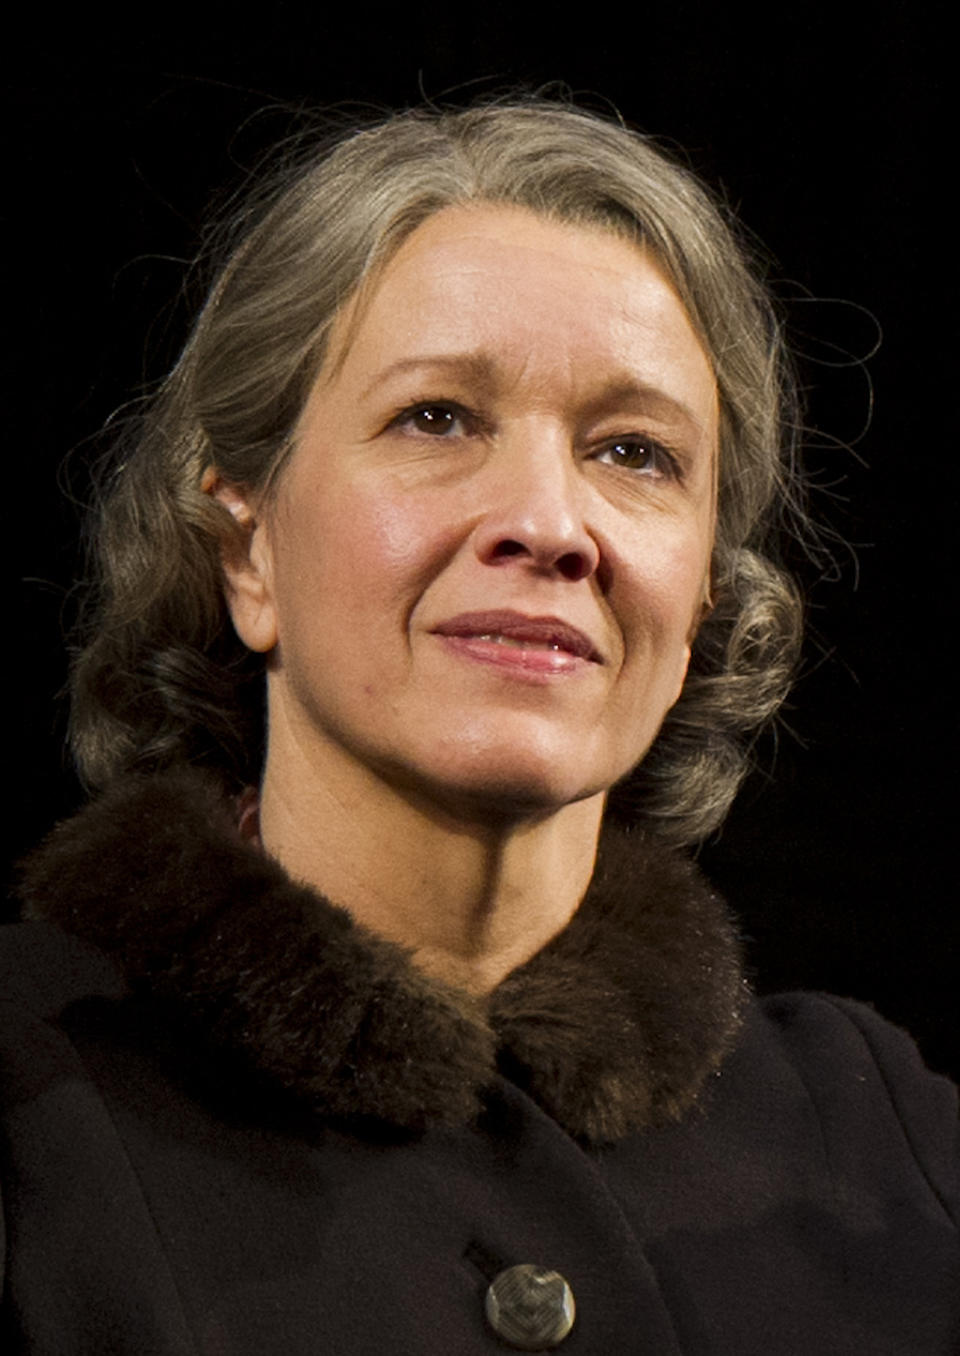 In this March 15, 2012 file photo, actress Linda Emond appears at the curtain call for the opening night performance of the Broadway revival of Arthur Miller's "Death of A Salesman" in New York. (AP Photo/Charles Sykes, file)